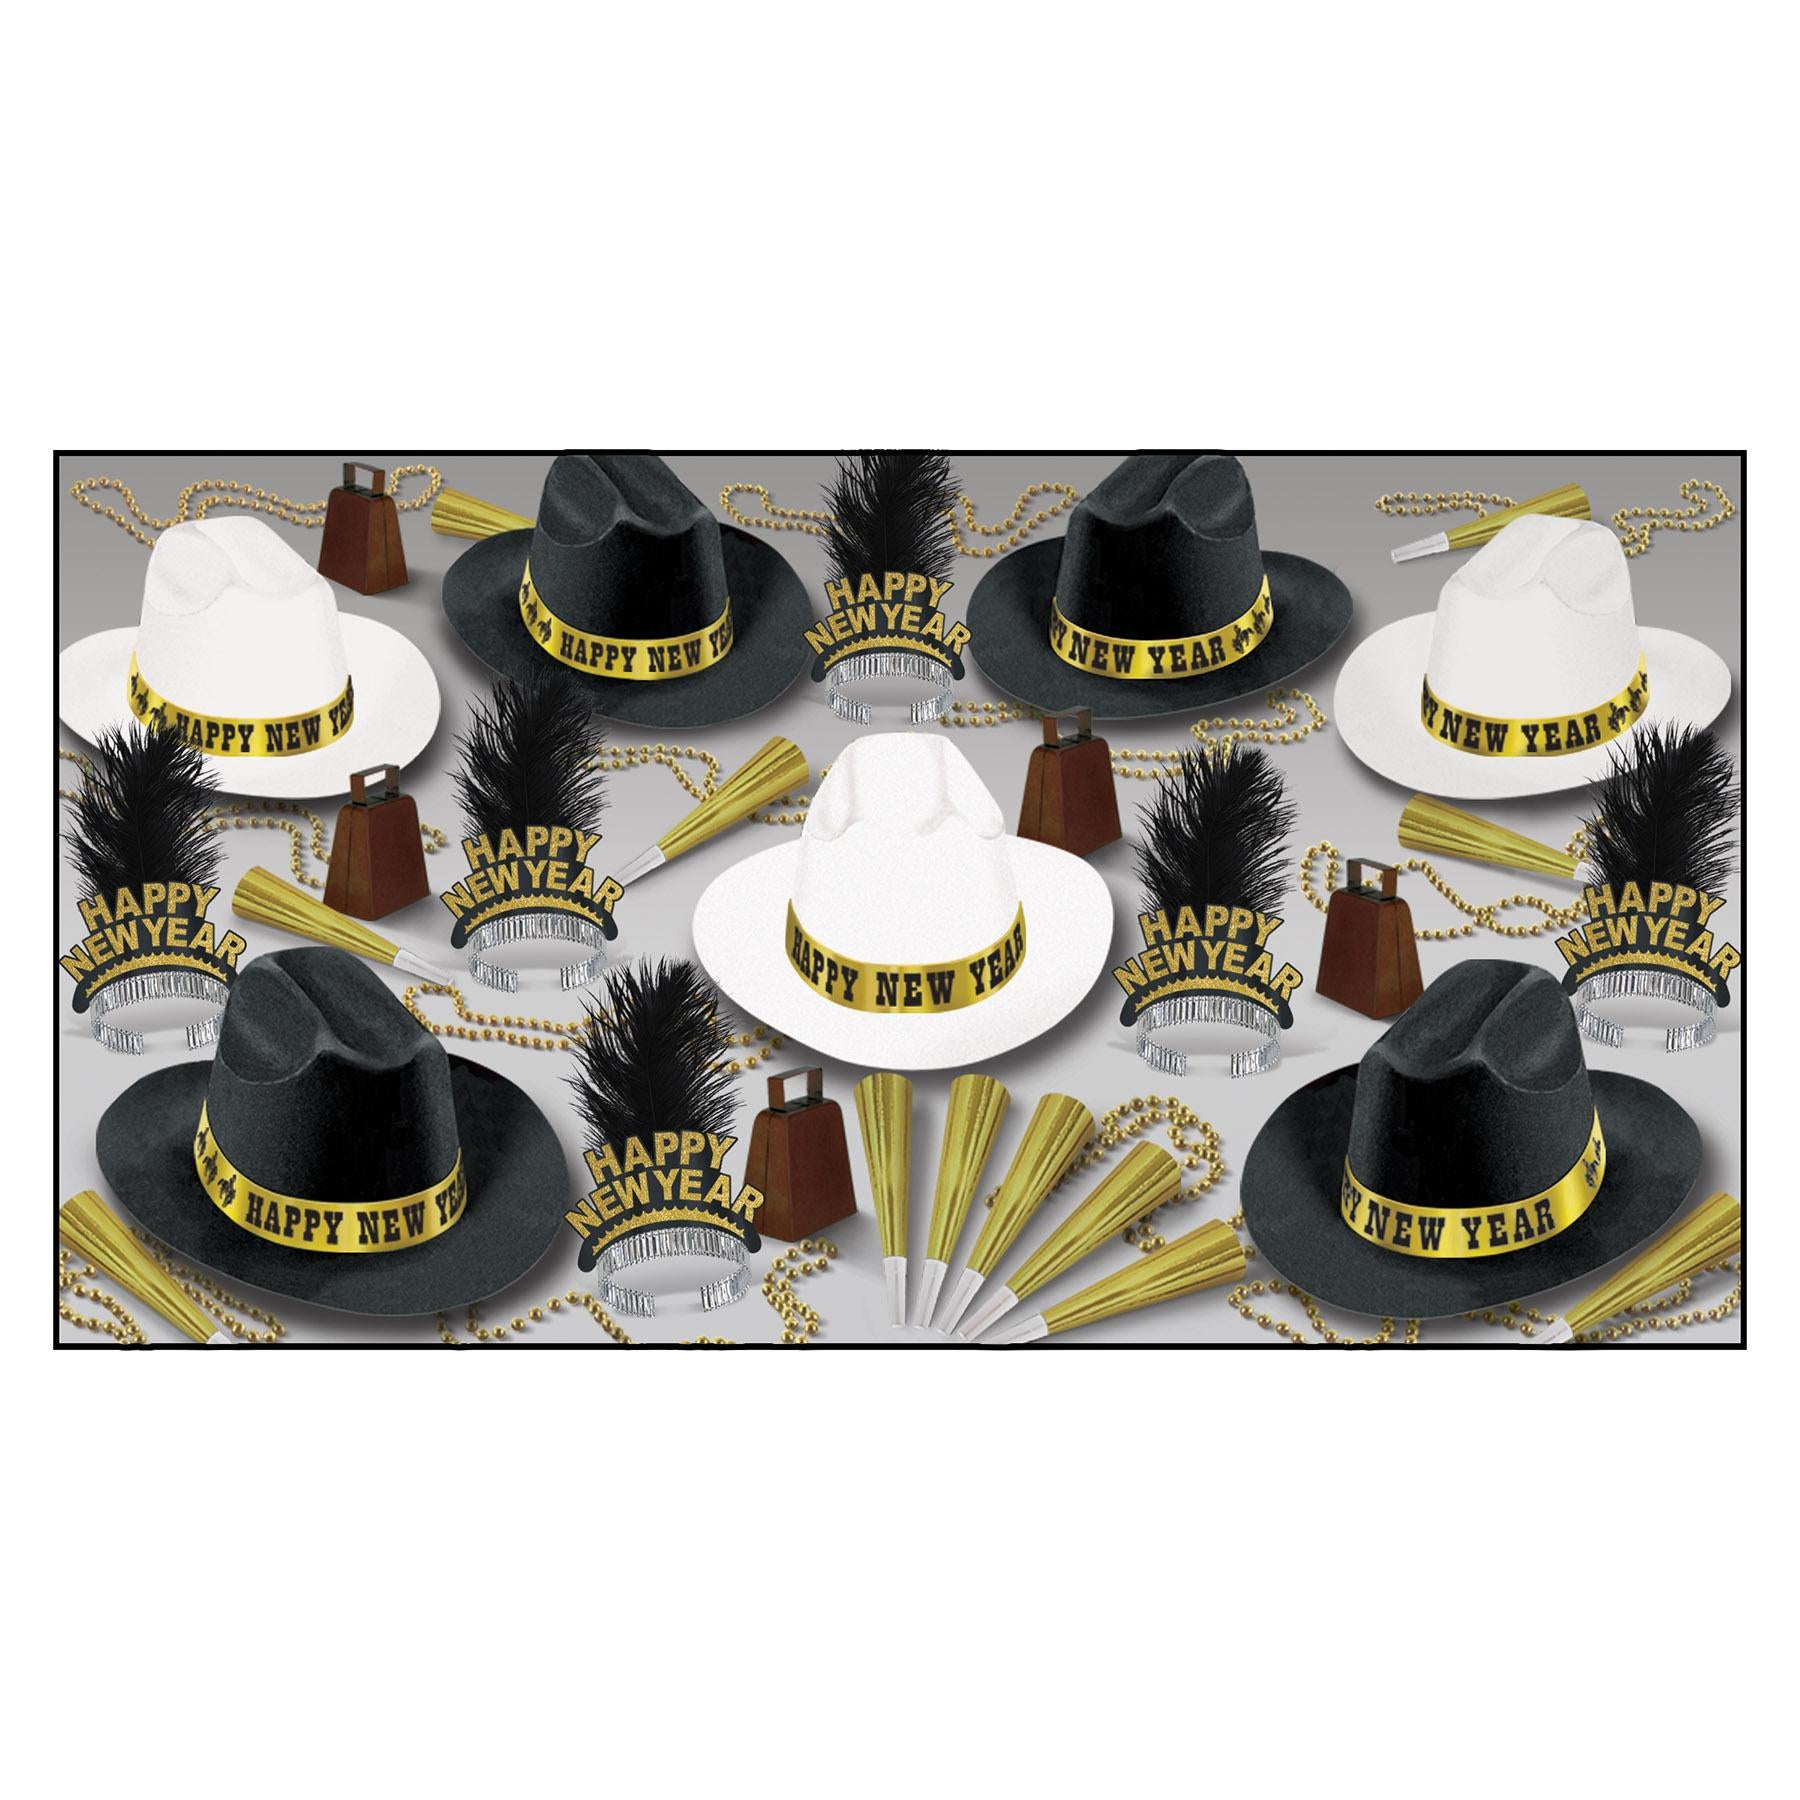 Western Nights New Year's Eve Party Kit for 50 People